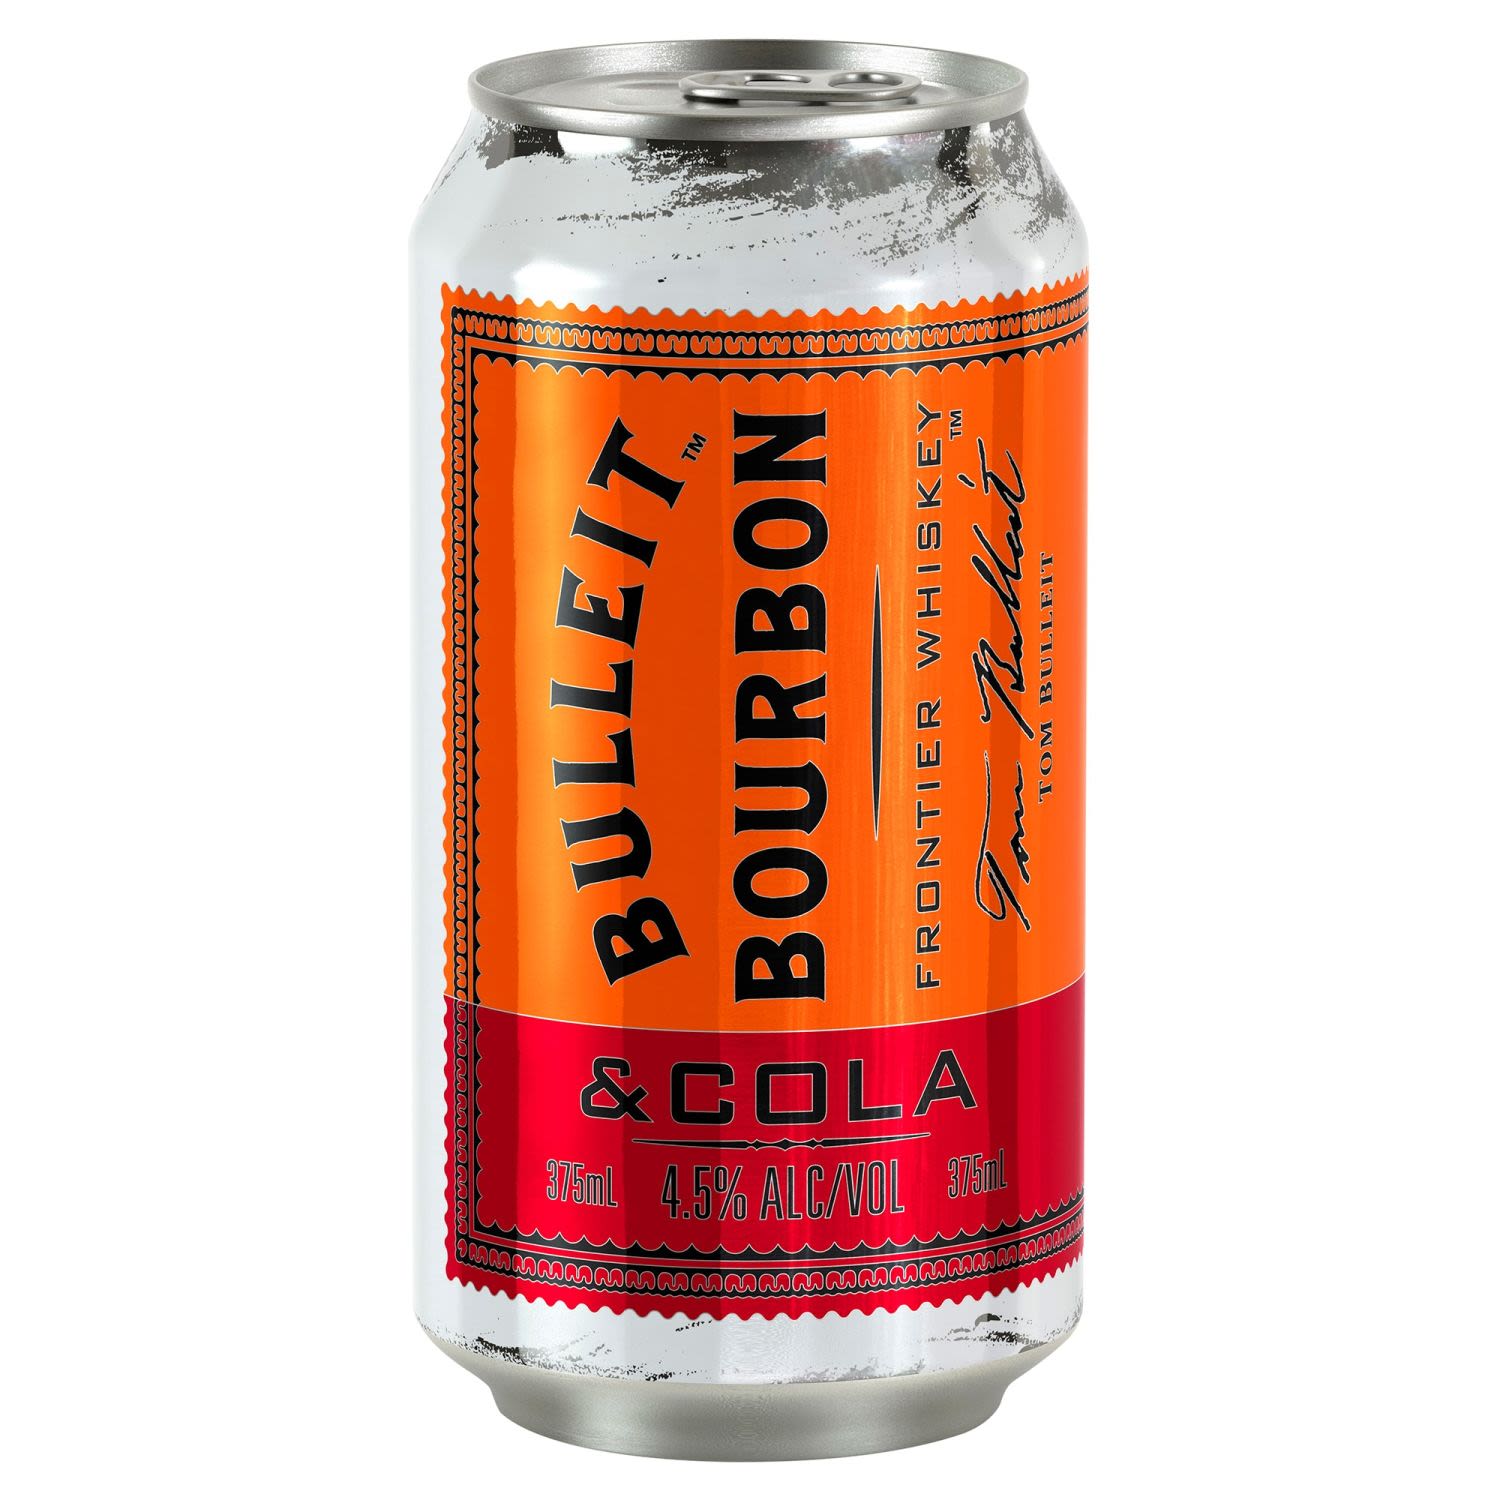 One of the driest of all bourbons, delivering a full-bodied and spicy taste with a long, smooth finish. Now pre-mixed in a can with cola ready for your convenience and enjoyment.<br /> <br />Alcohol Volume: 4.50%<br /><br />Pack Format: Can<br /><br />Standard Drinks: 1.3</br /><br />Pack Type: Can<br />